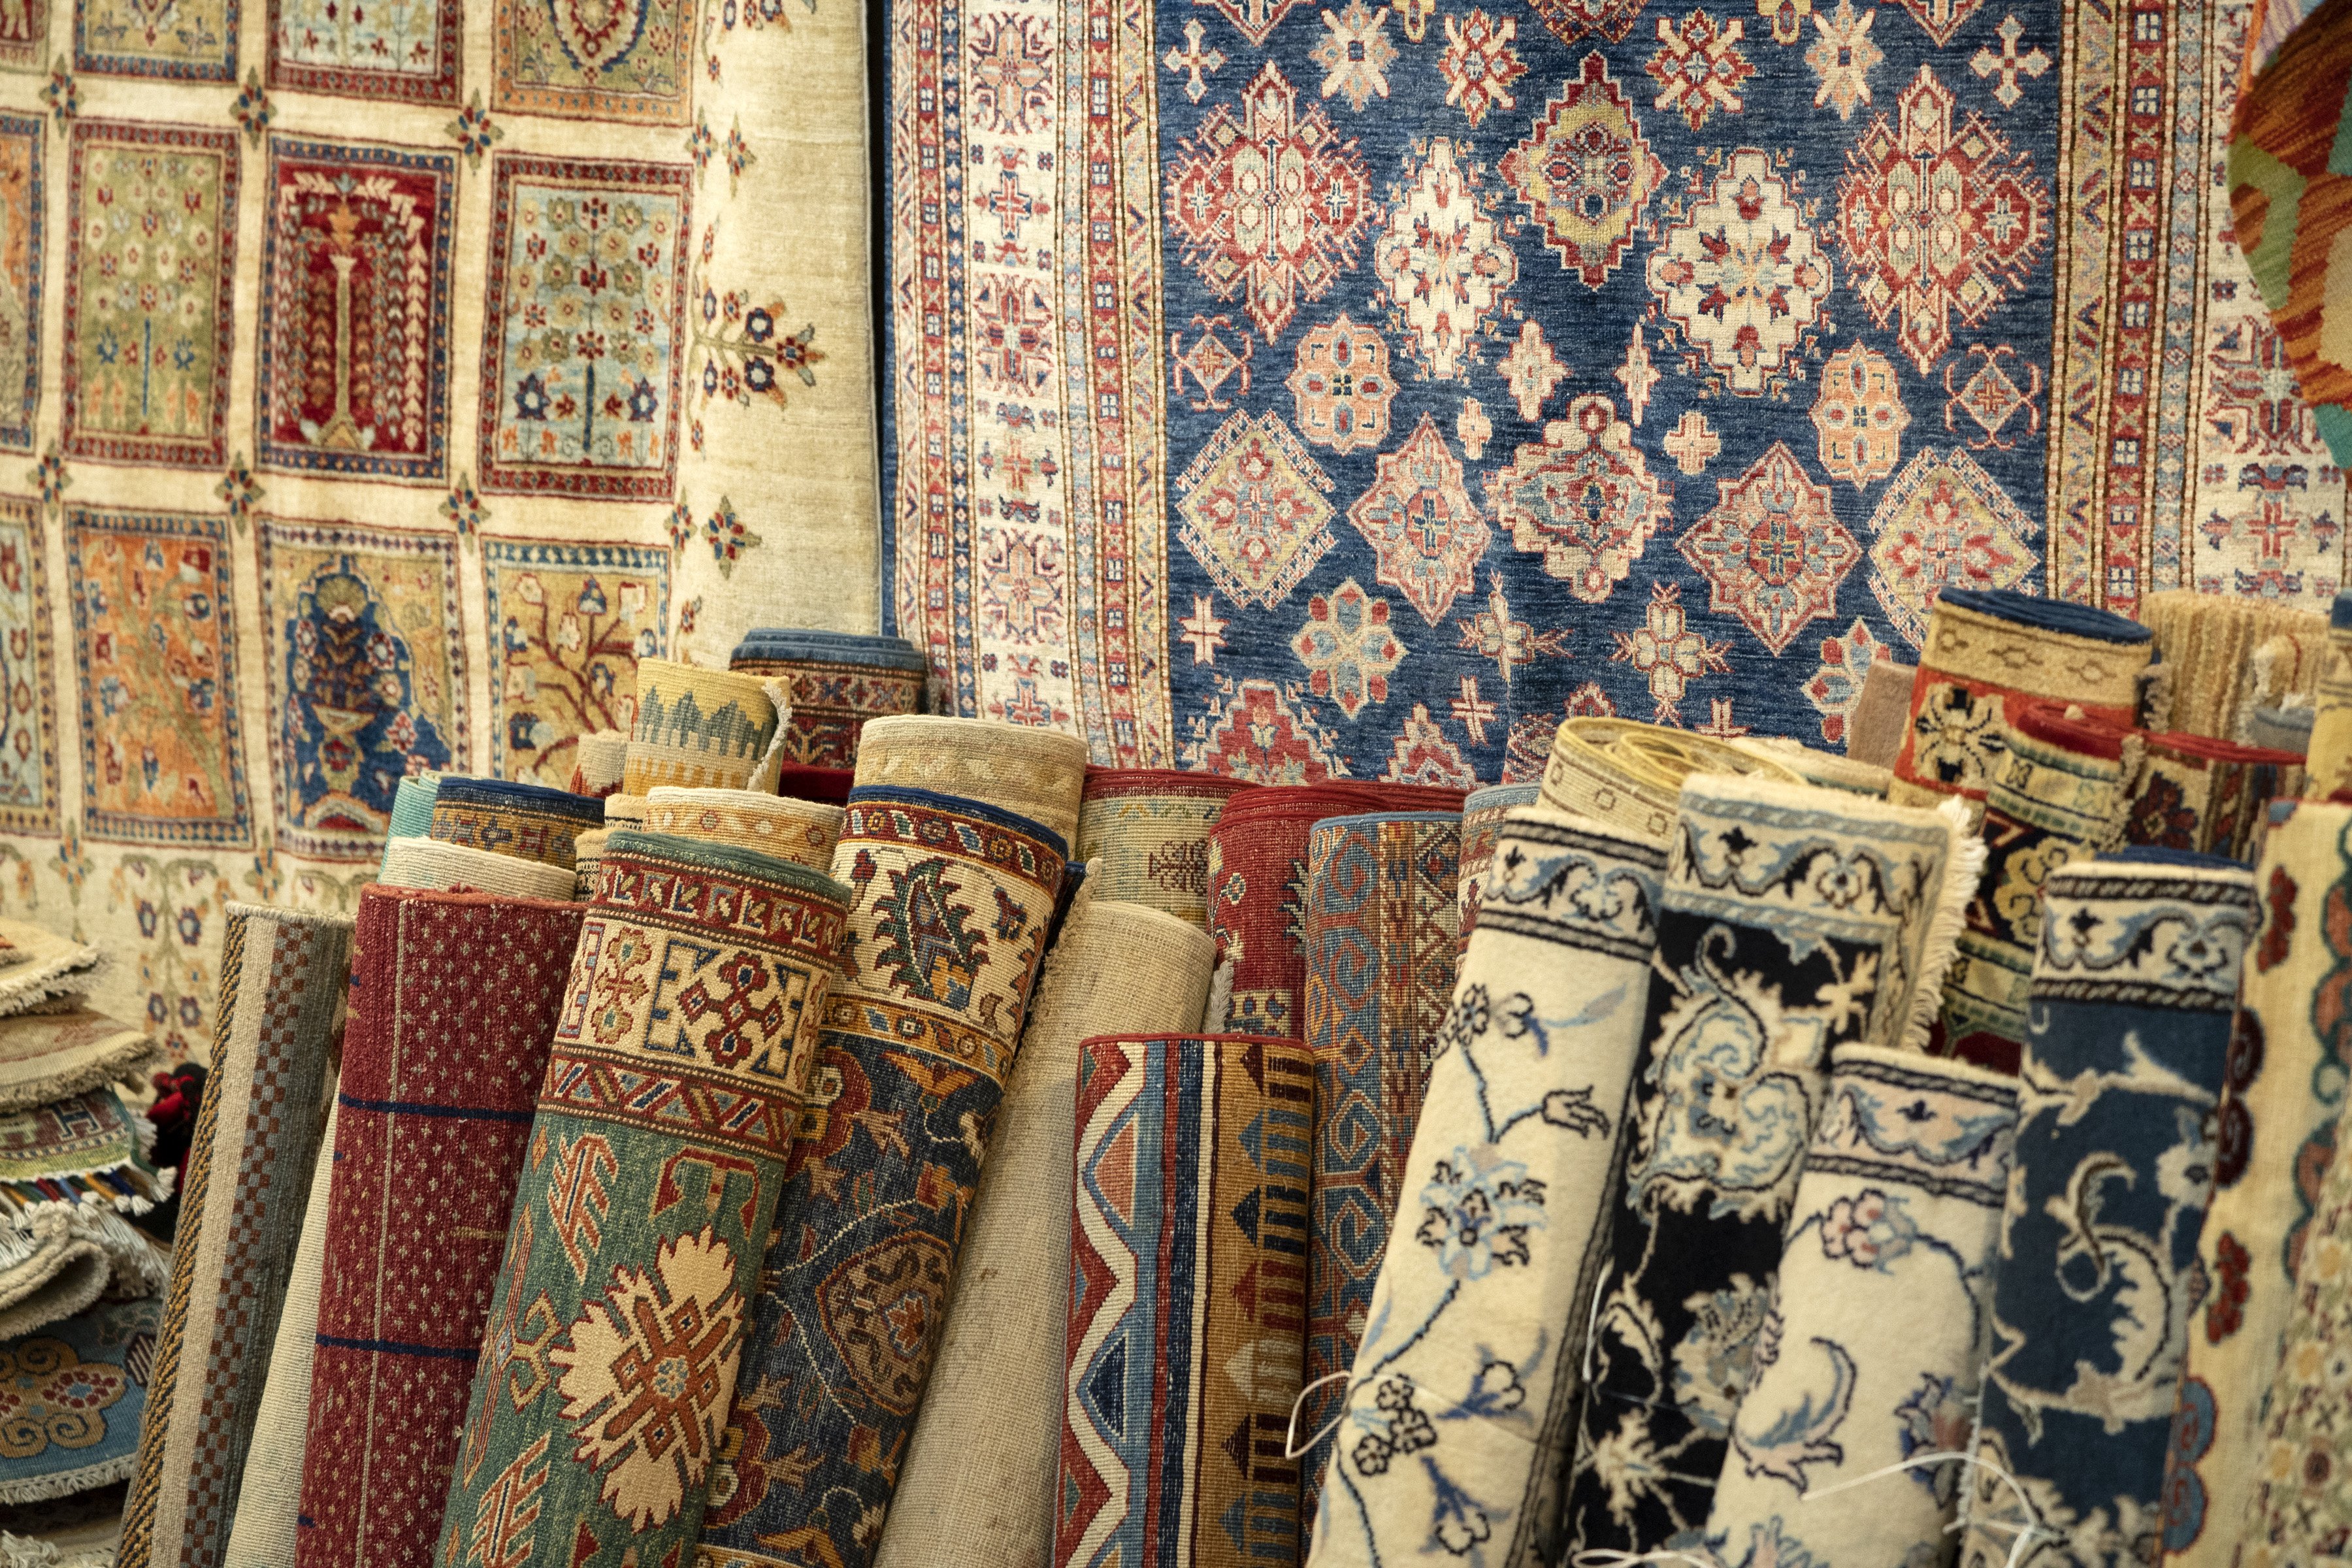 showroom filled with area rugs from Floor Fashions of Virginia in the Charlottesville, VA area